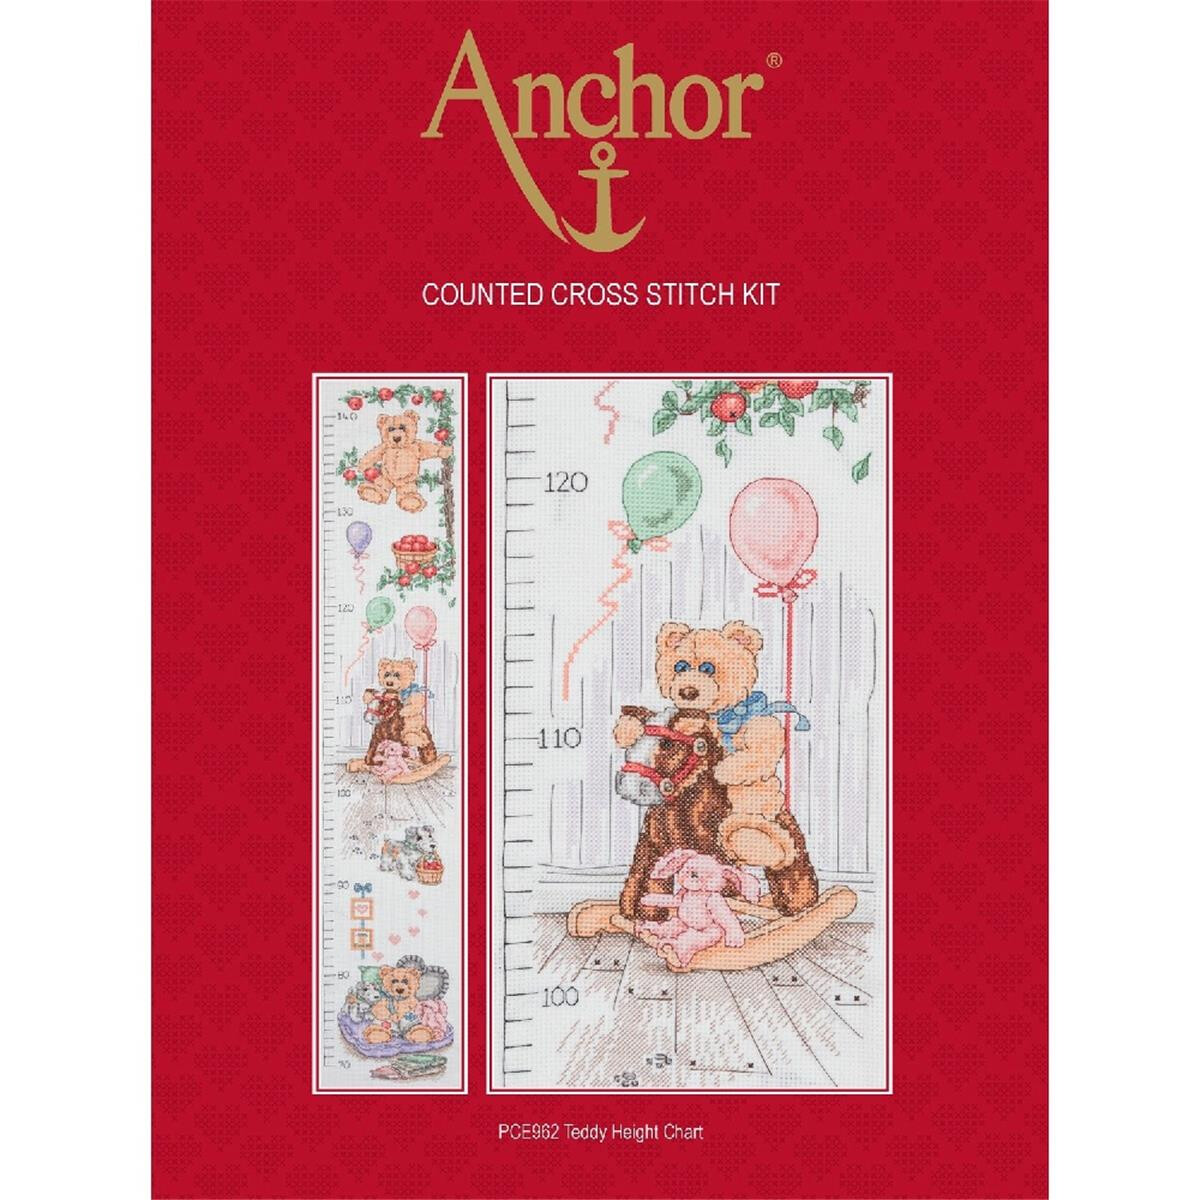 Anchor counted Cross Stitch kit "Teddy Height...